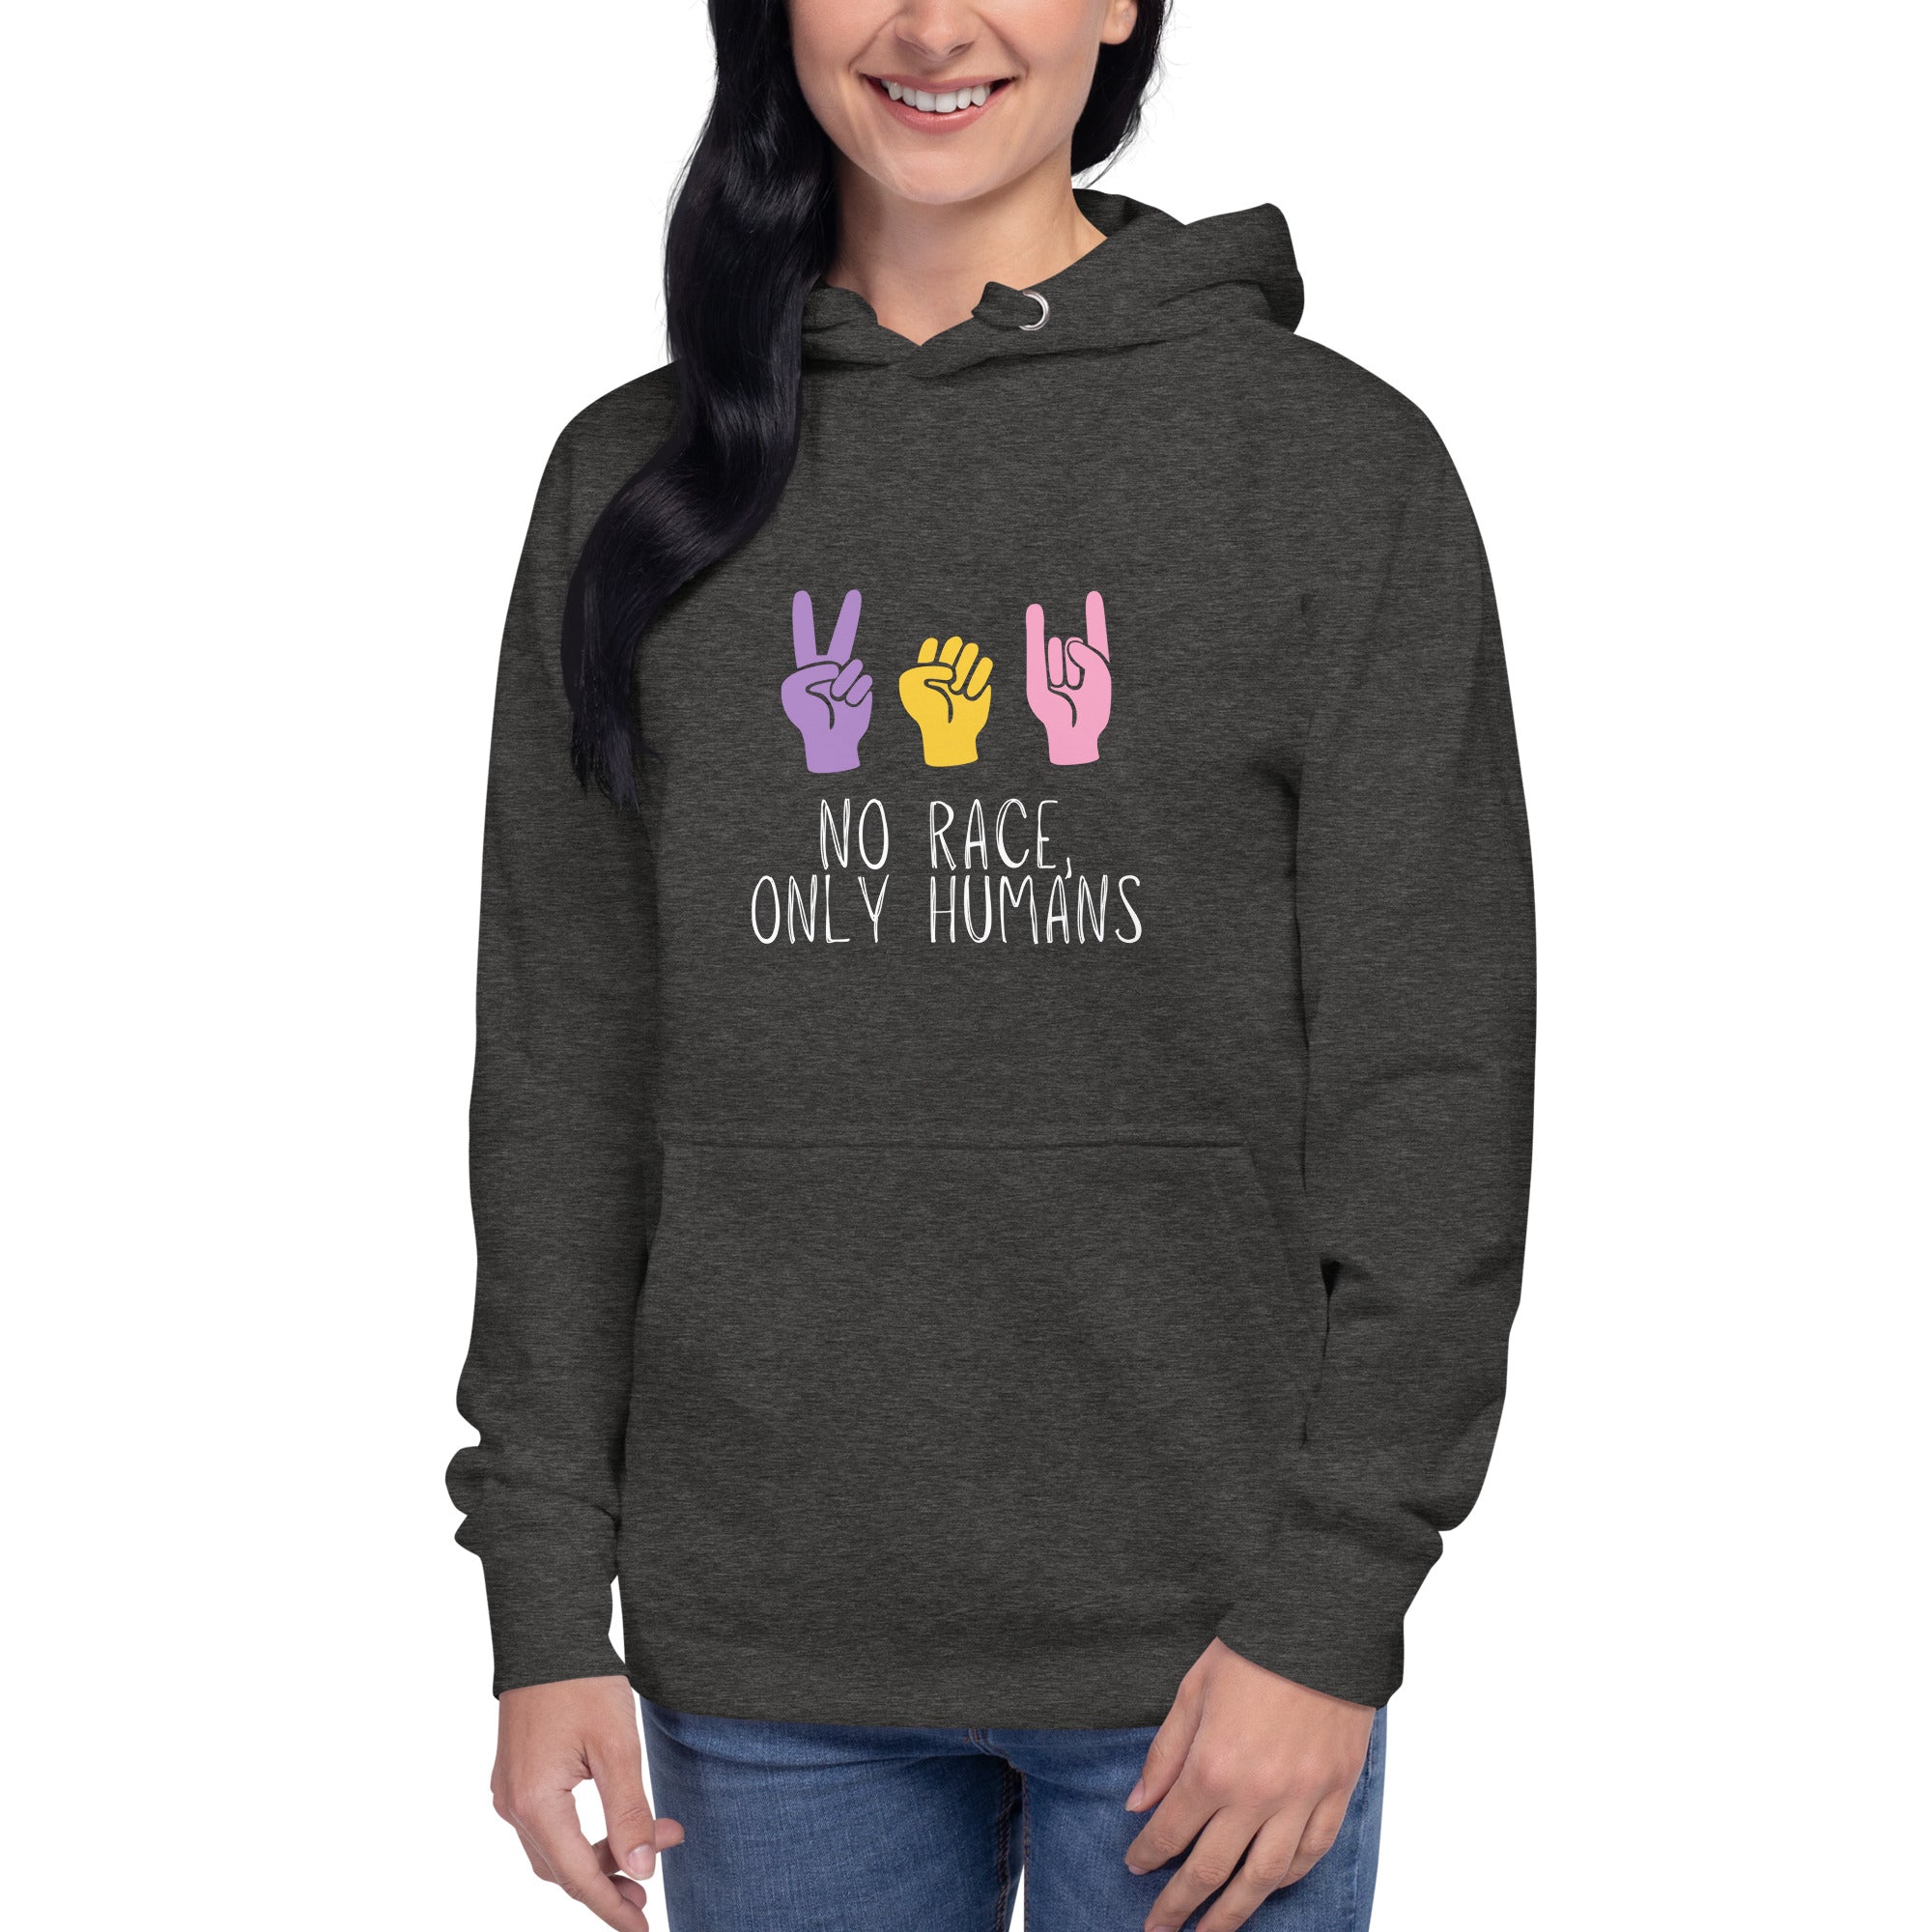 No Race, Only Humans, Unisex Hoodie